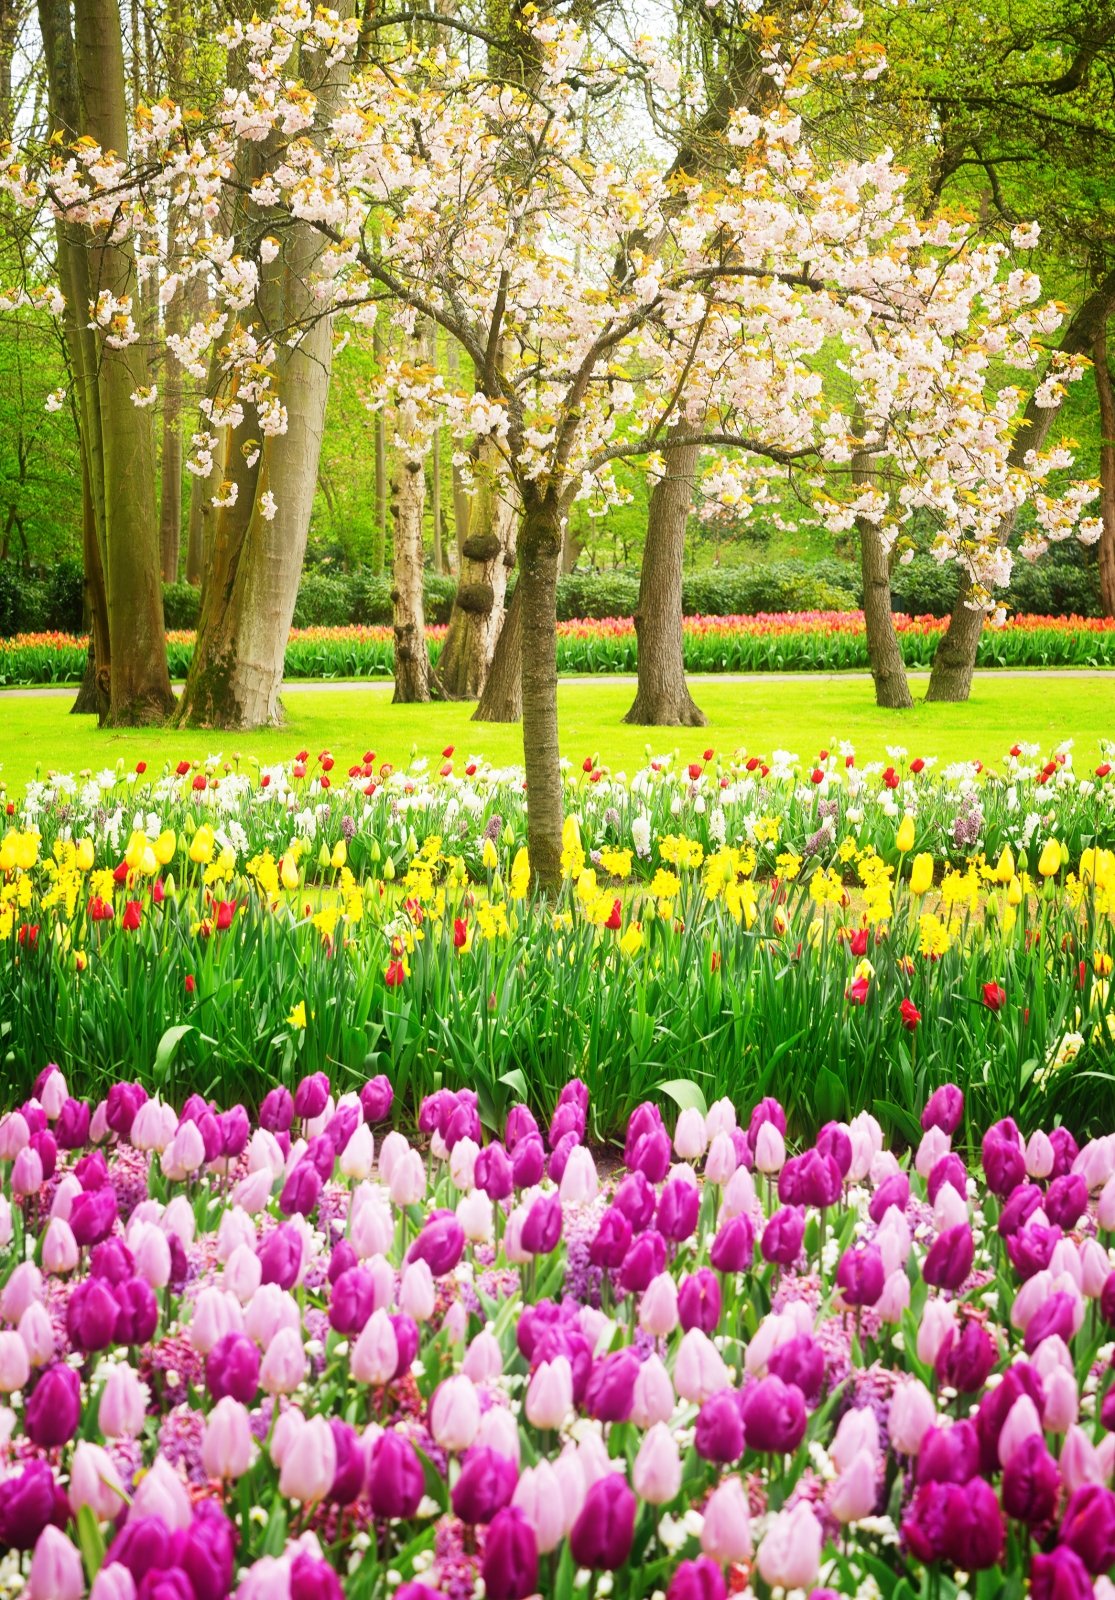 Spring Flowers and Gardens: Total Eye Candy!